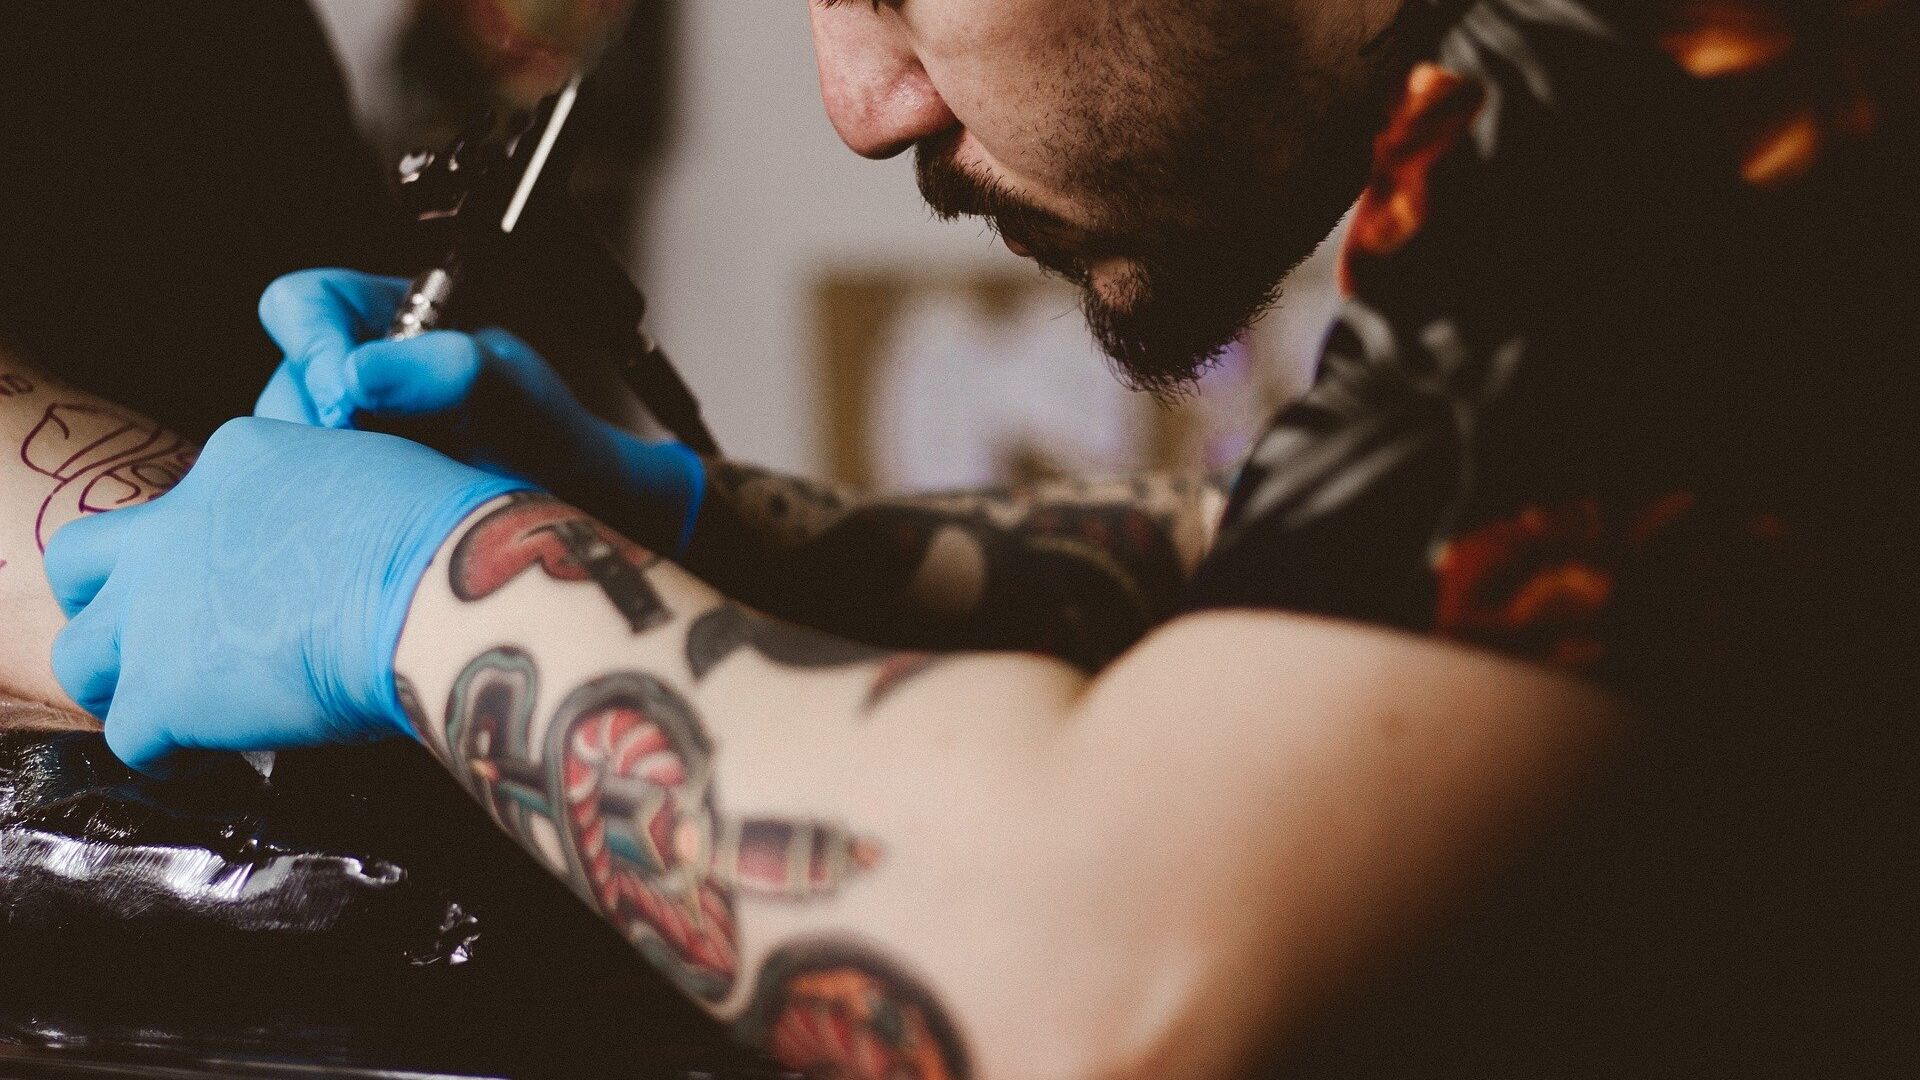 High Grade Tattoo Studio - Bird tattoo🔥. ❓Answer for previous Question of  the day: The longest tattoo session (multiple people) is 60 hr 30 min  ⭕Check previous post for the question if